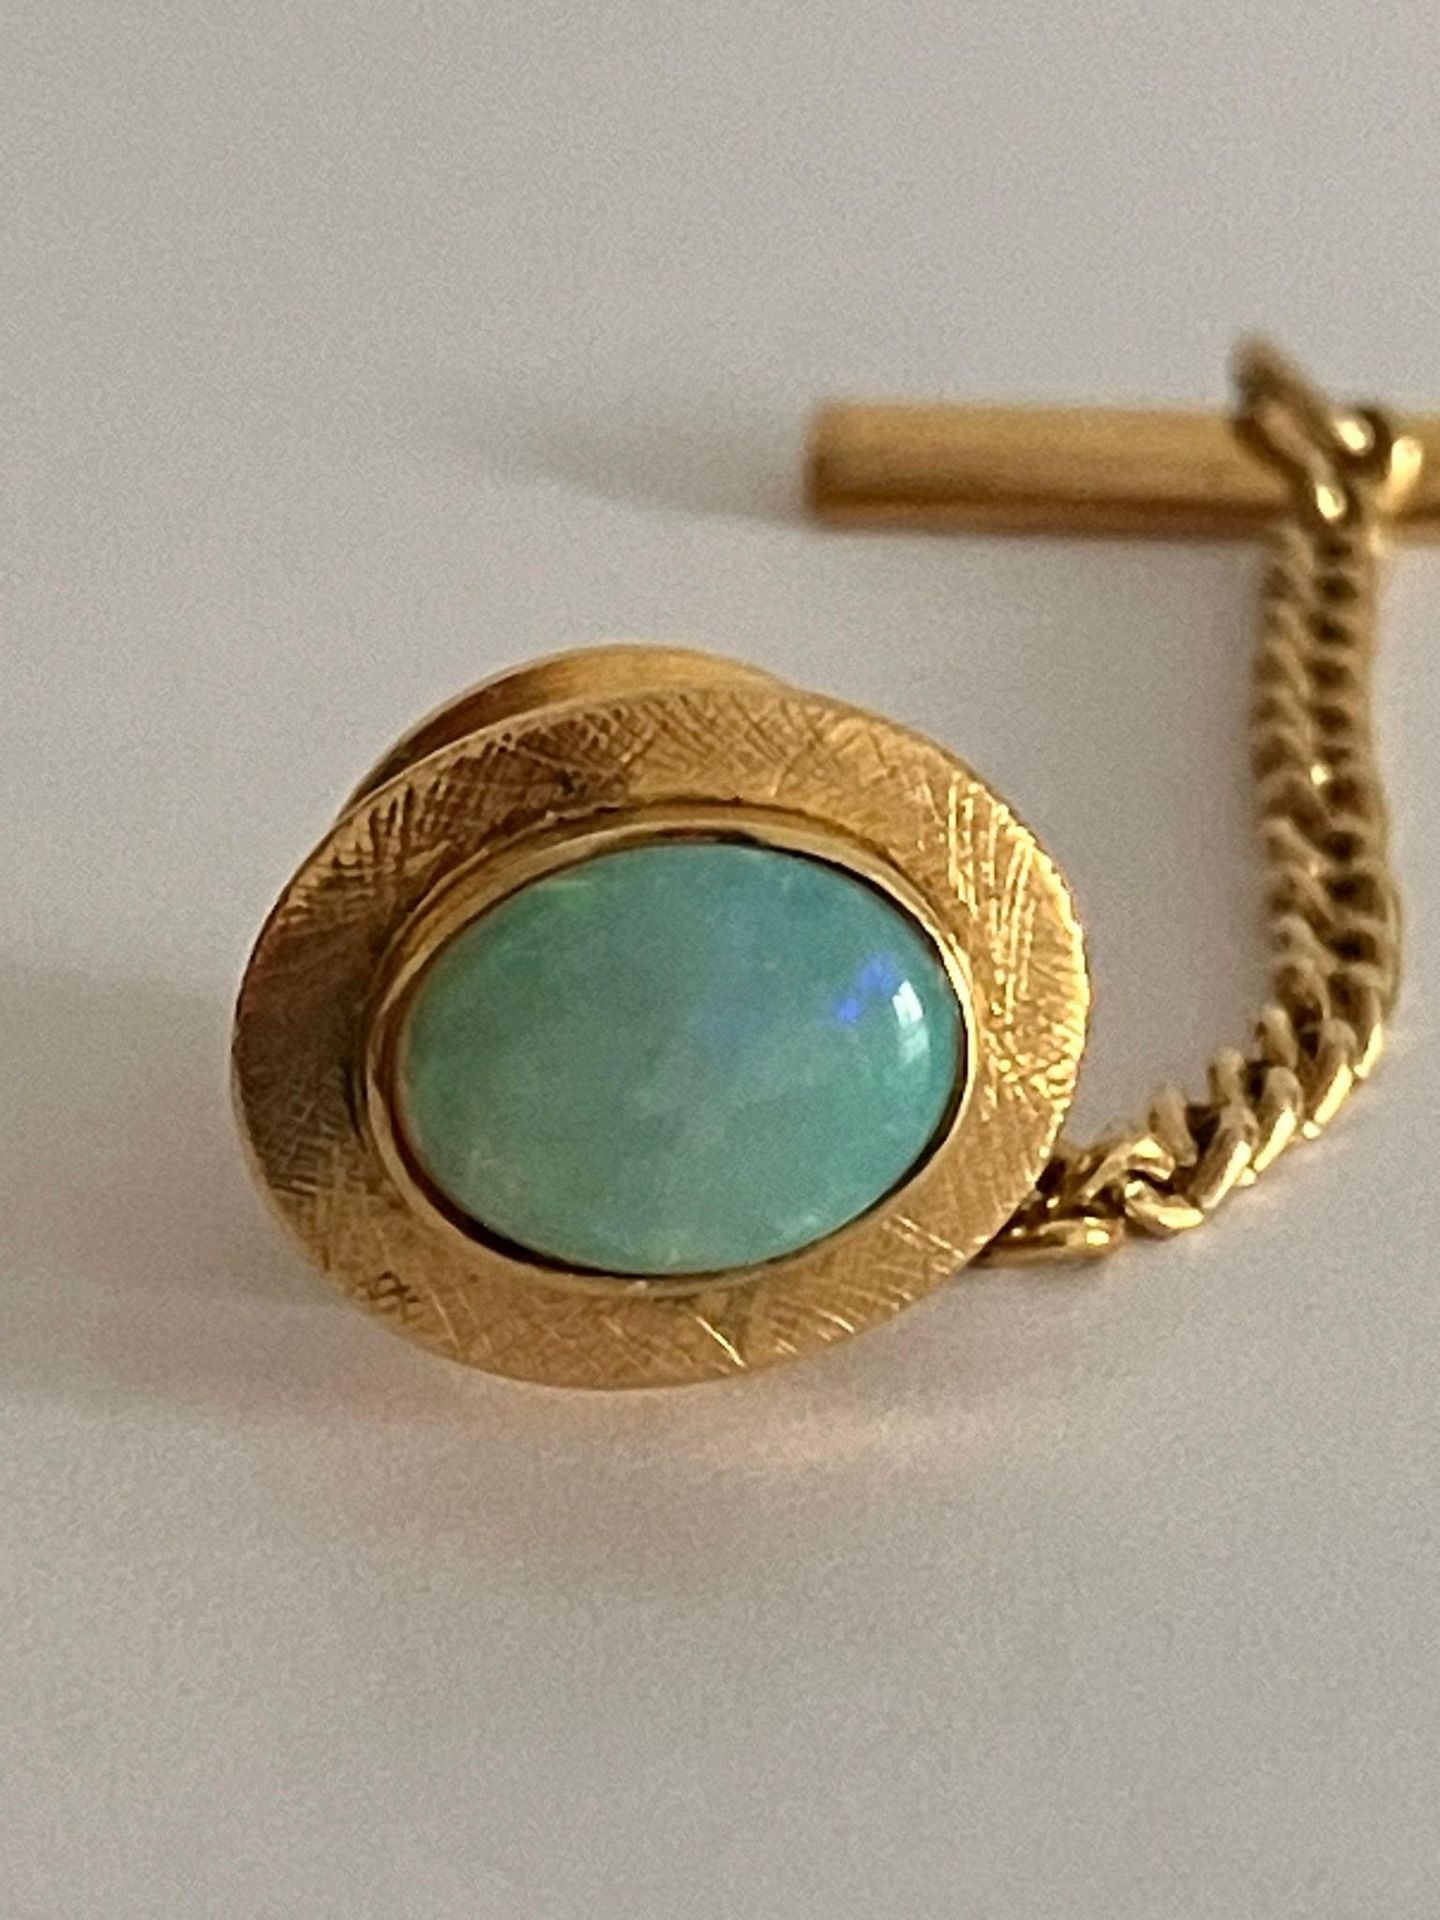 14 carat GOLD TIE PIN set with OPAL. Please note chain is gilt not gold.